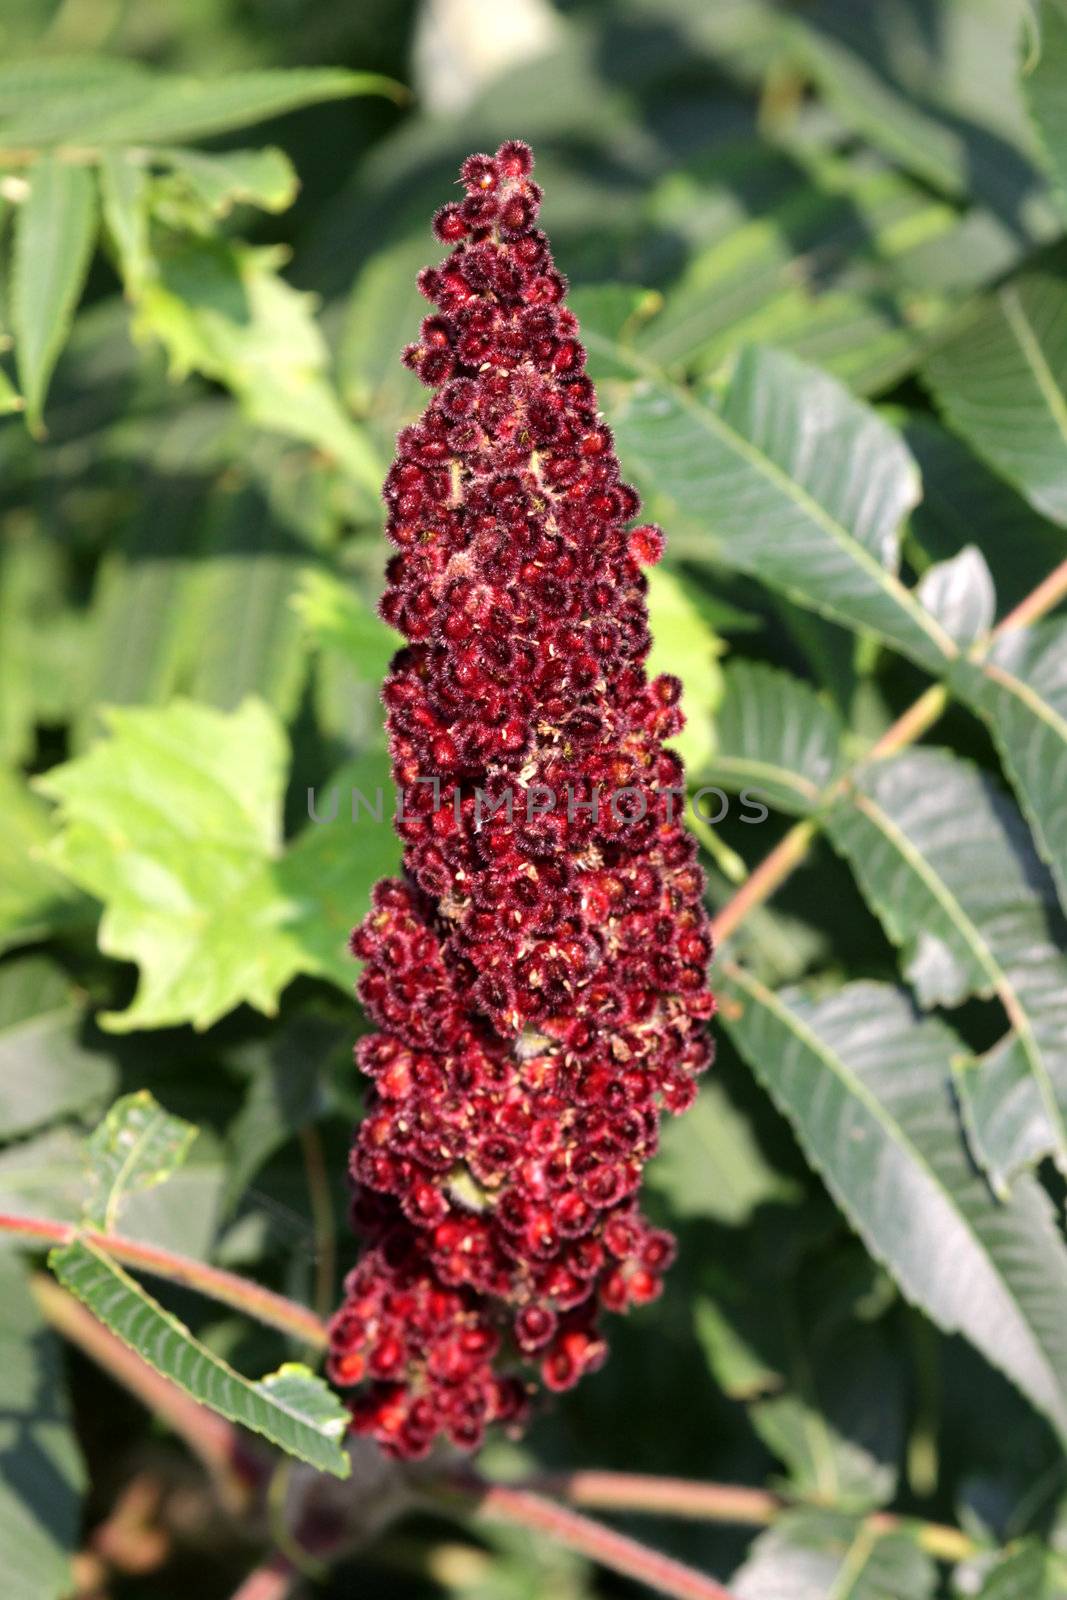 A close-up of a Staghorn Sumac (Rhus typhina) flower.